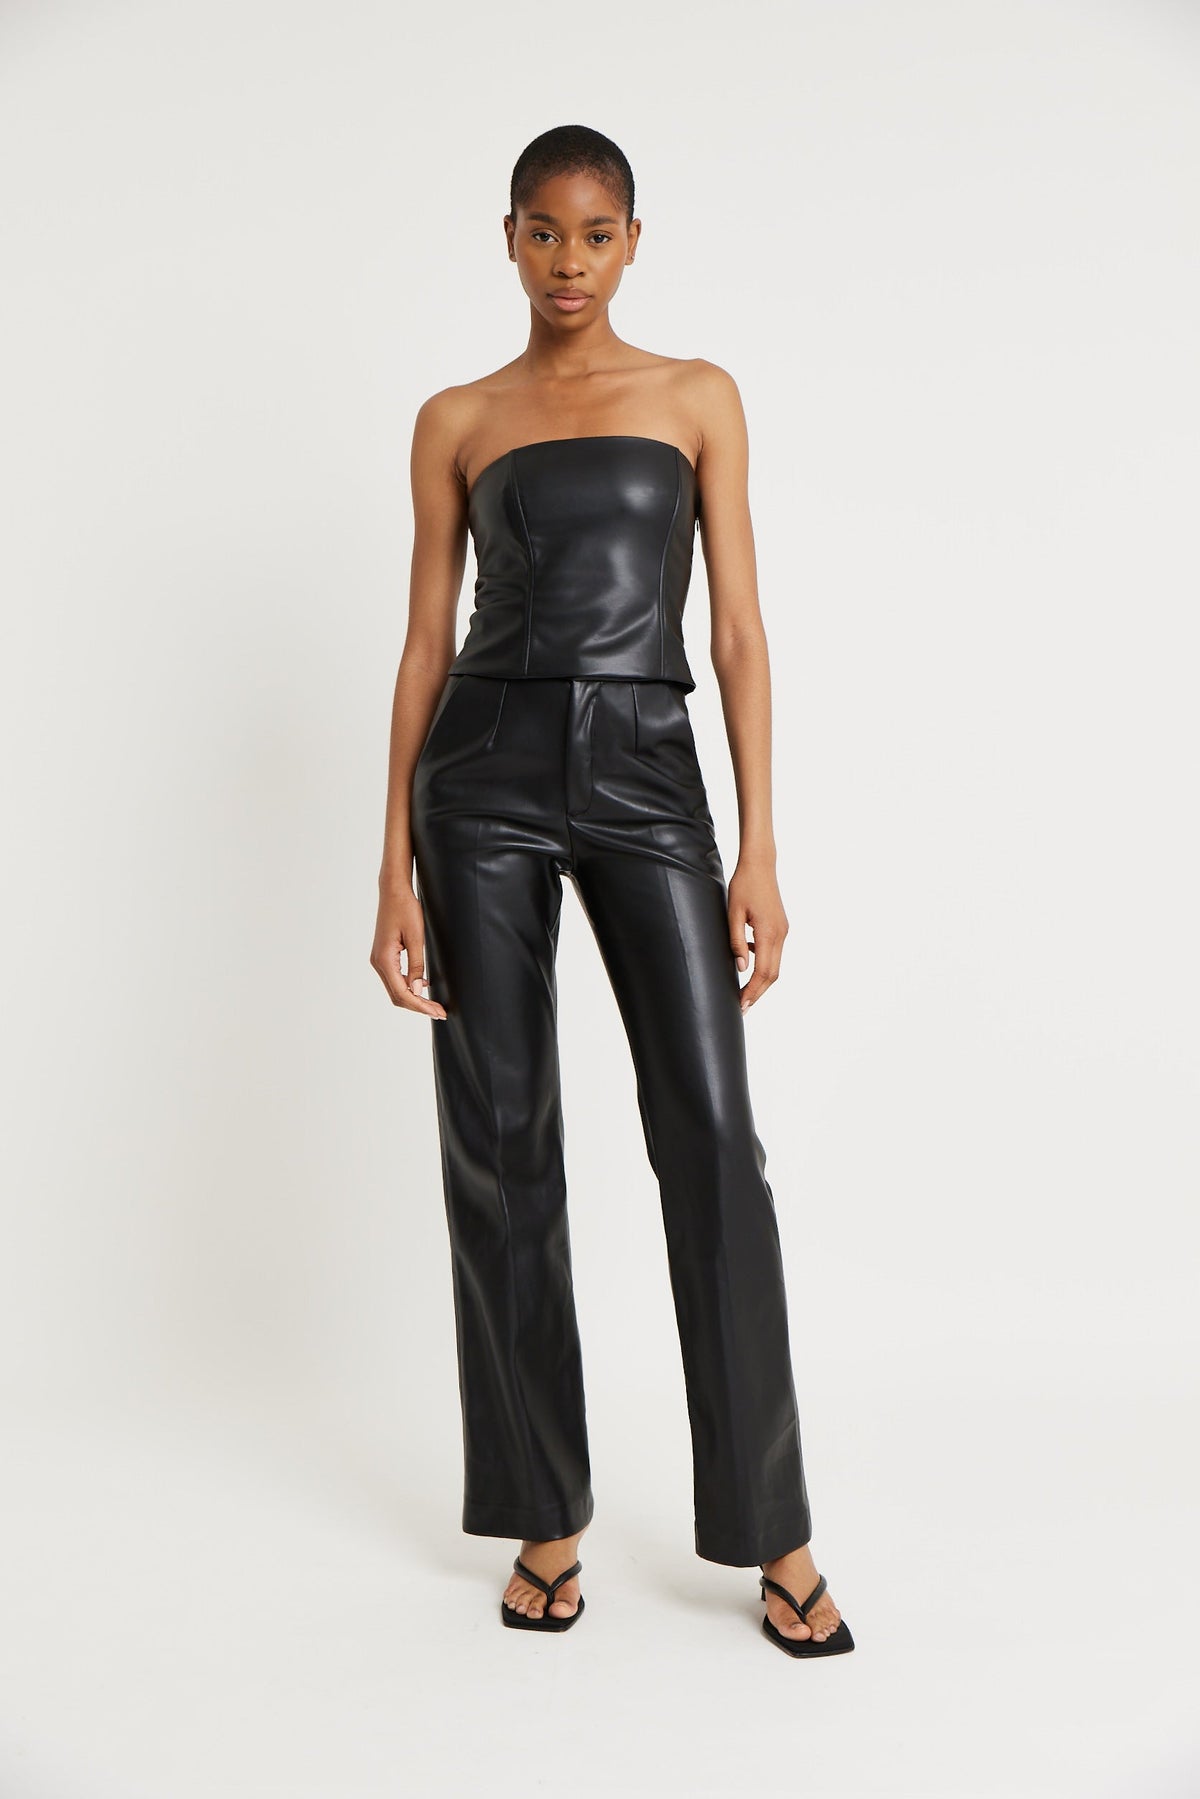 Tailored Leather Strapless Bodice - Black